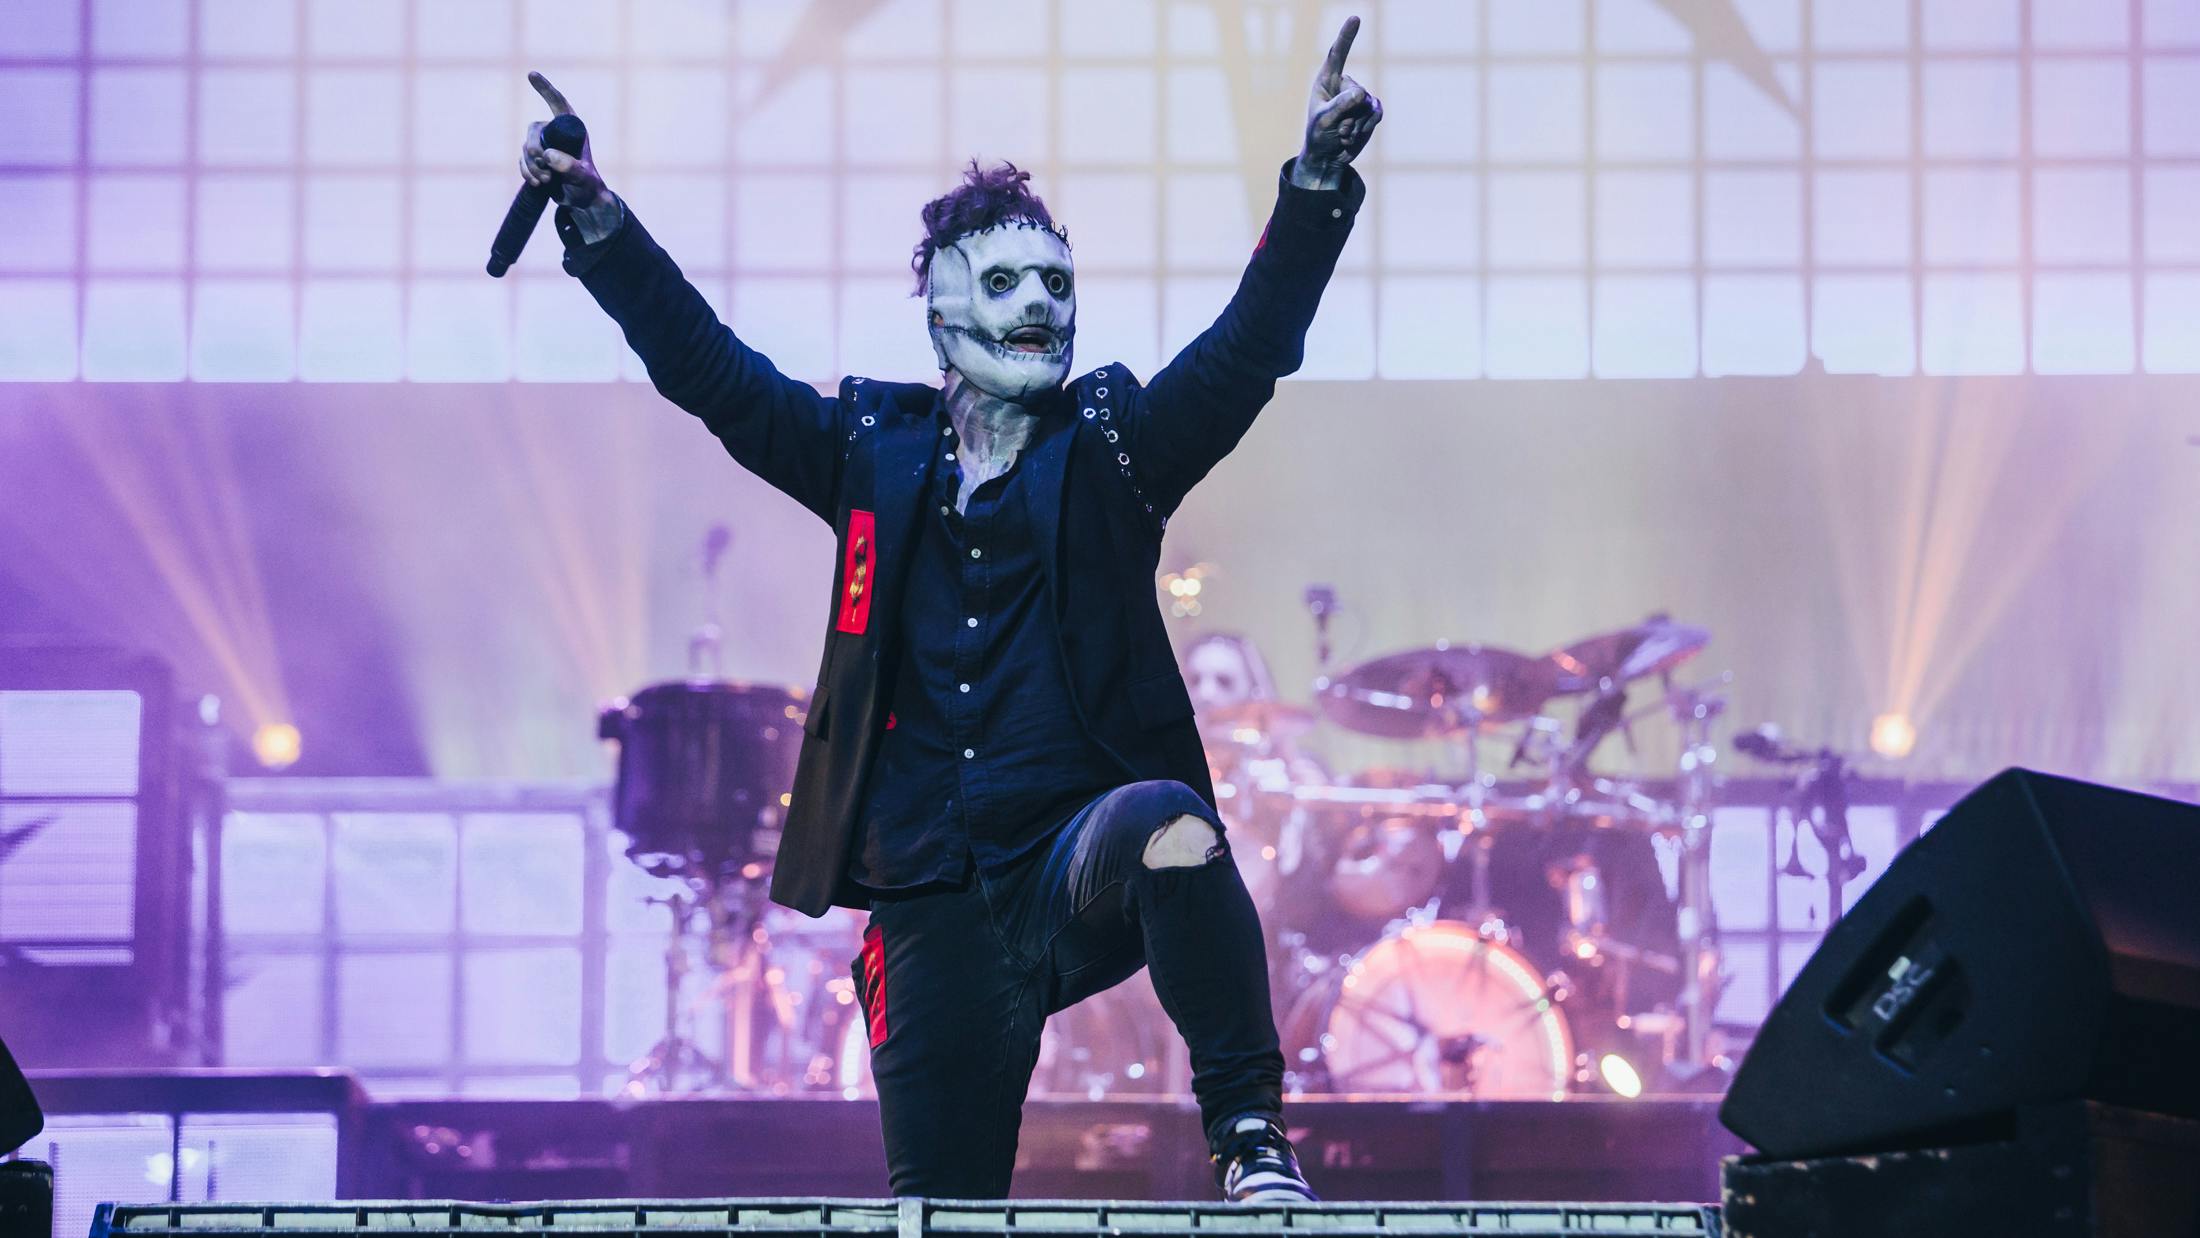 The Misfits and Slipknot to headline Sonic Temple festival